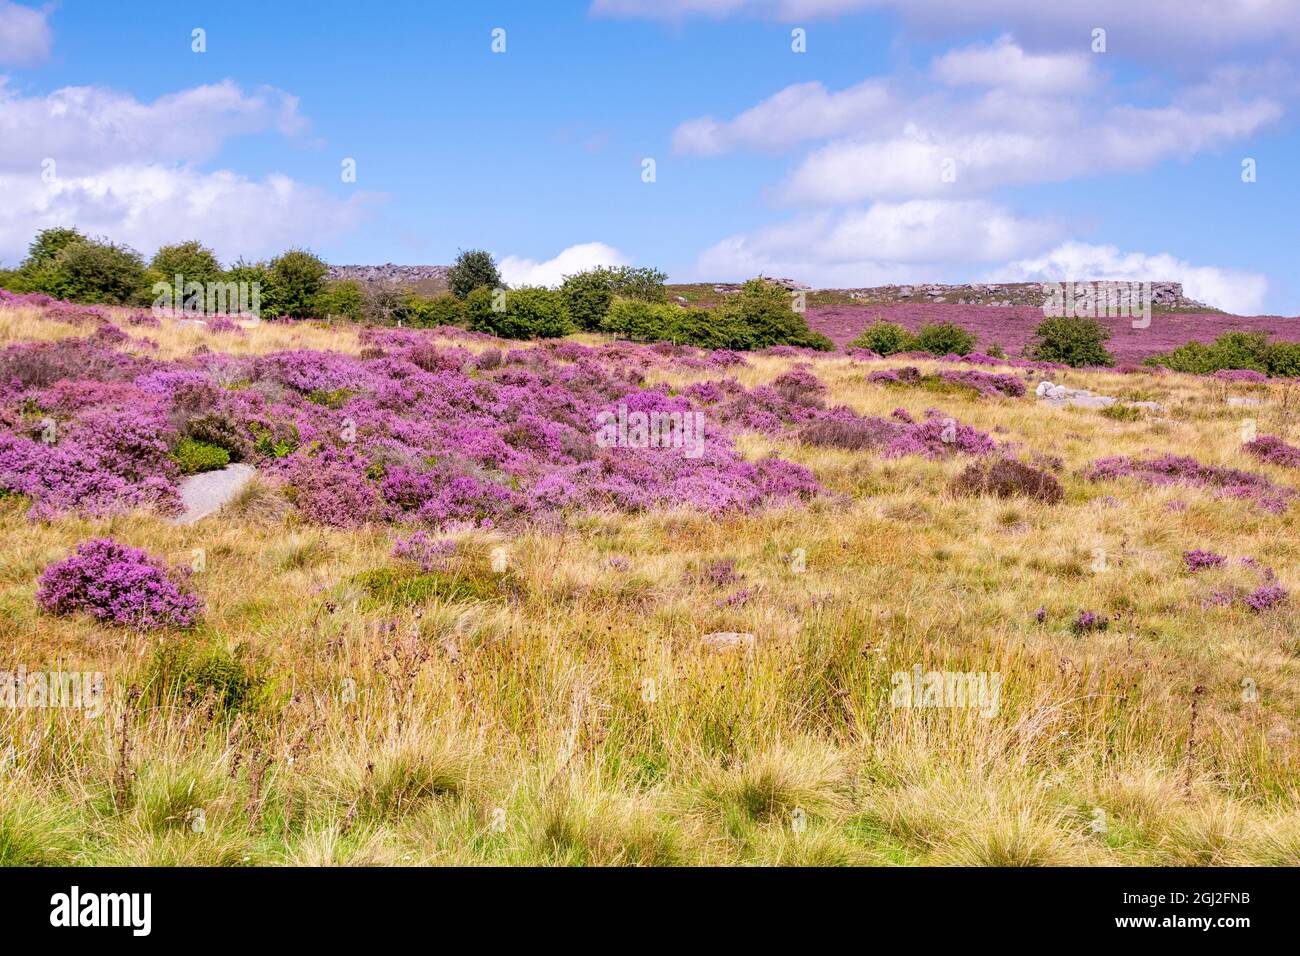 Derbyshire UK - 20 Aug 2020: The beautiful Peak District landscape in August when flowering heathers turn the countryside pink Stock Photo